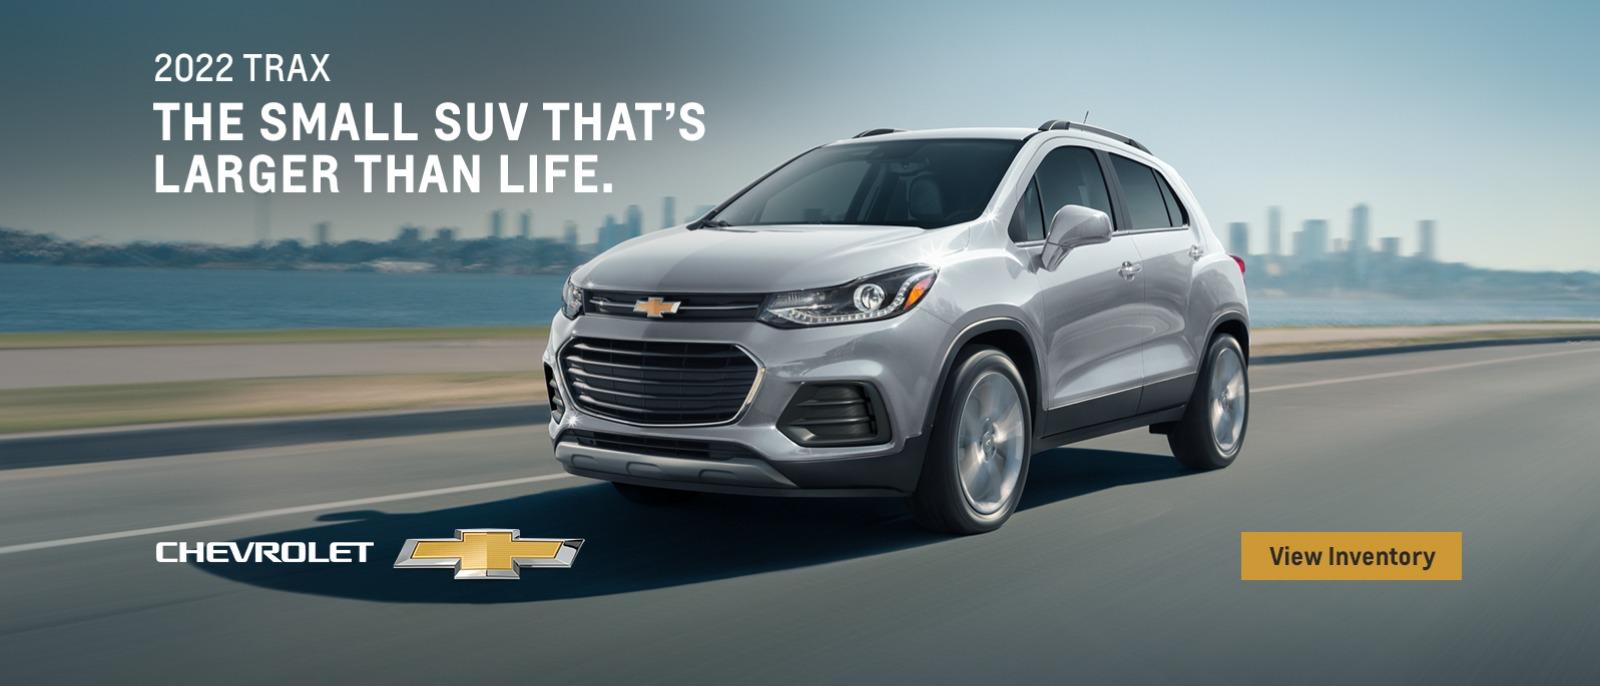 2022 Chevy Trax. The small SUV that's larger than life.